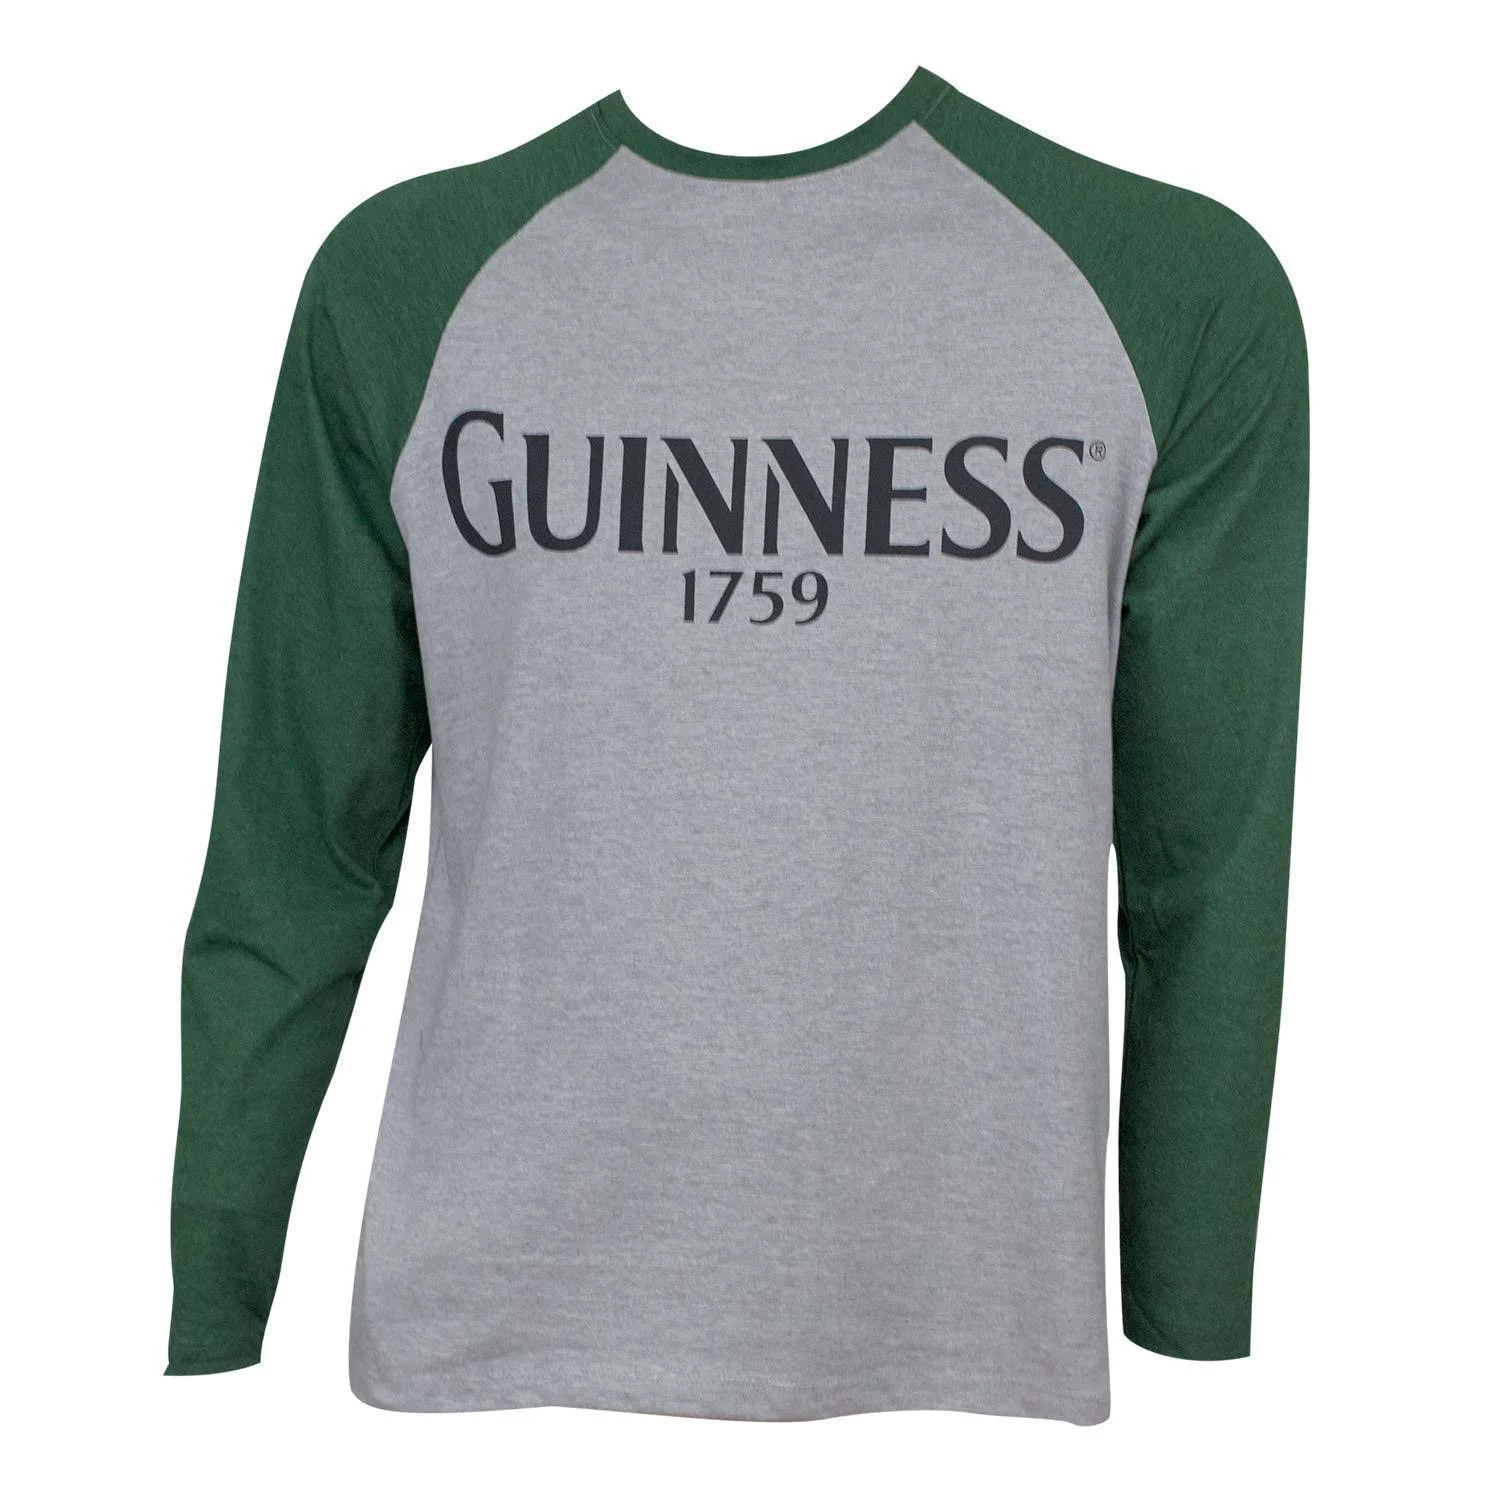 Logo Printd Promotional Clothing Made In Bangladesh Beers Guinness Baseball Manufacturer Wholesale